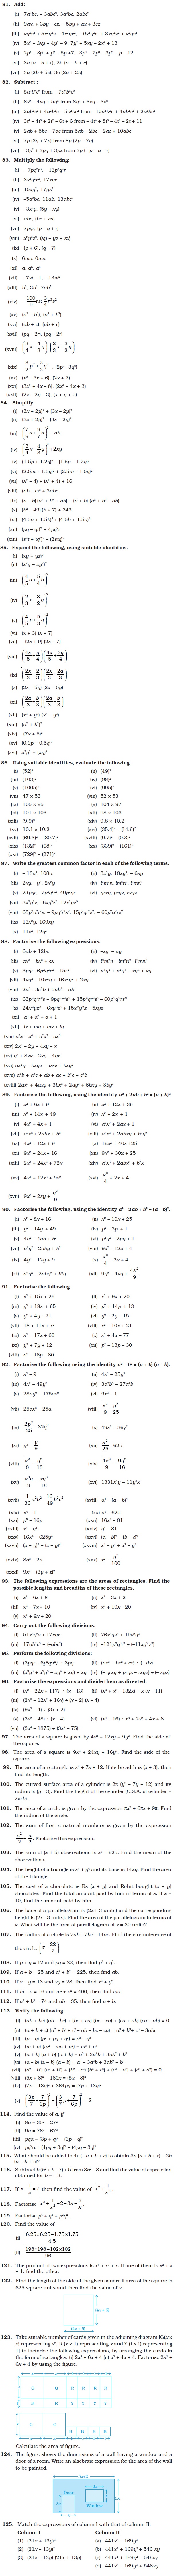 Algebraic Expressions, Identities and Factorisation/